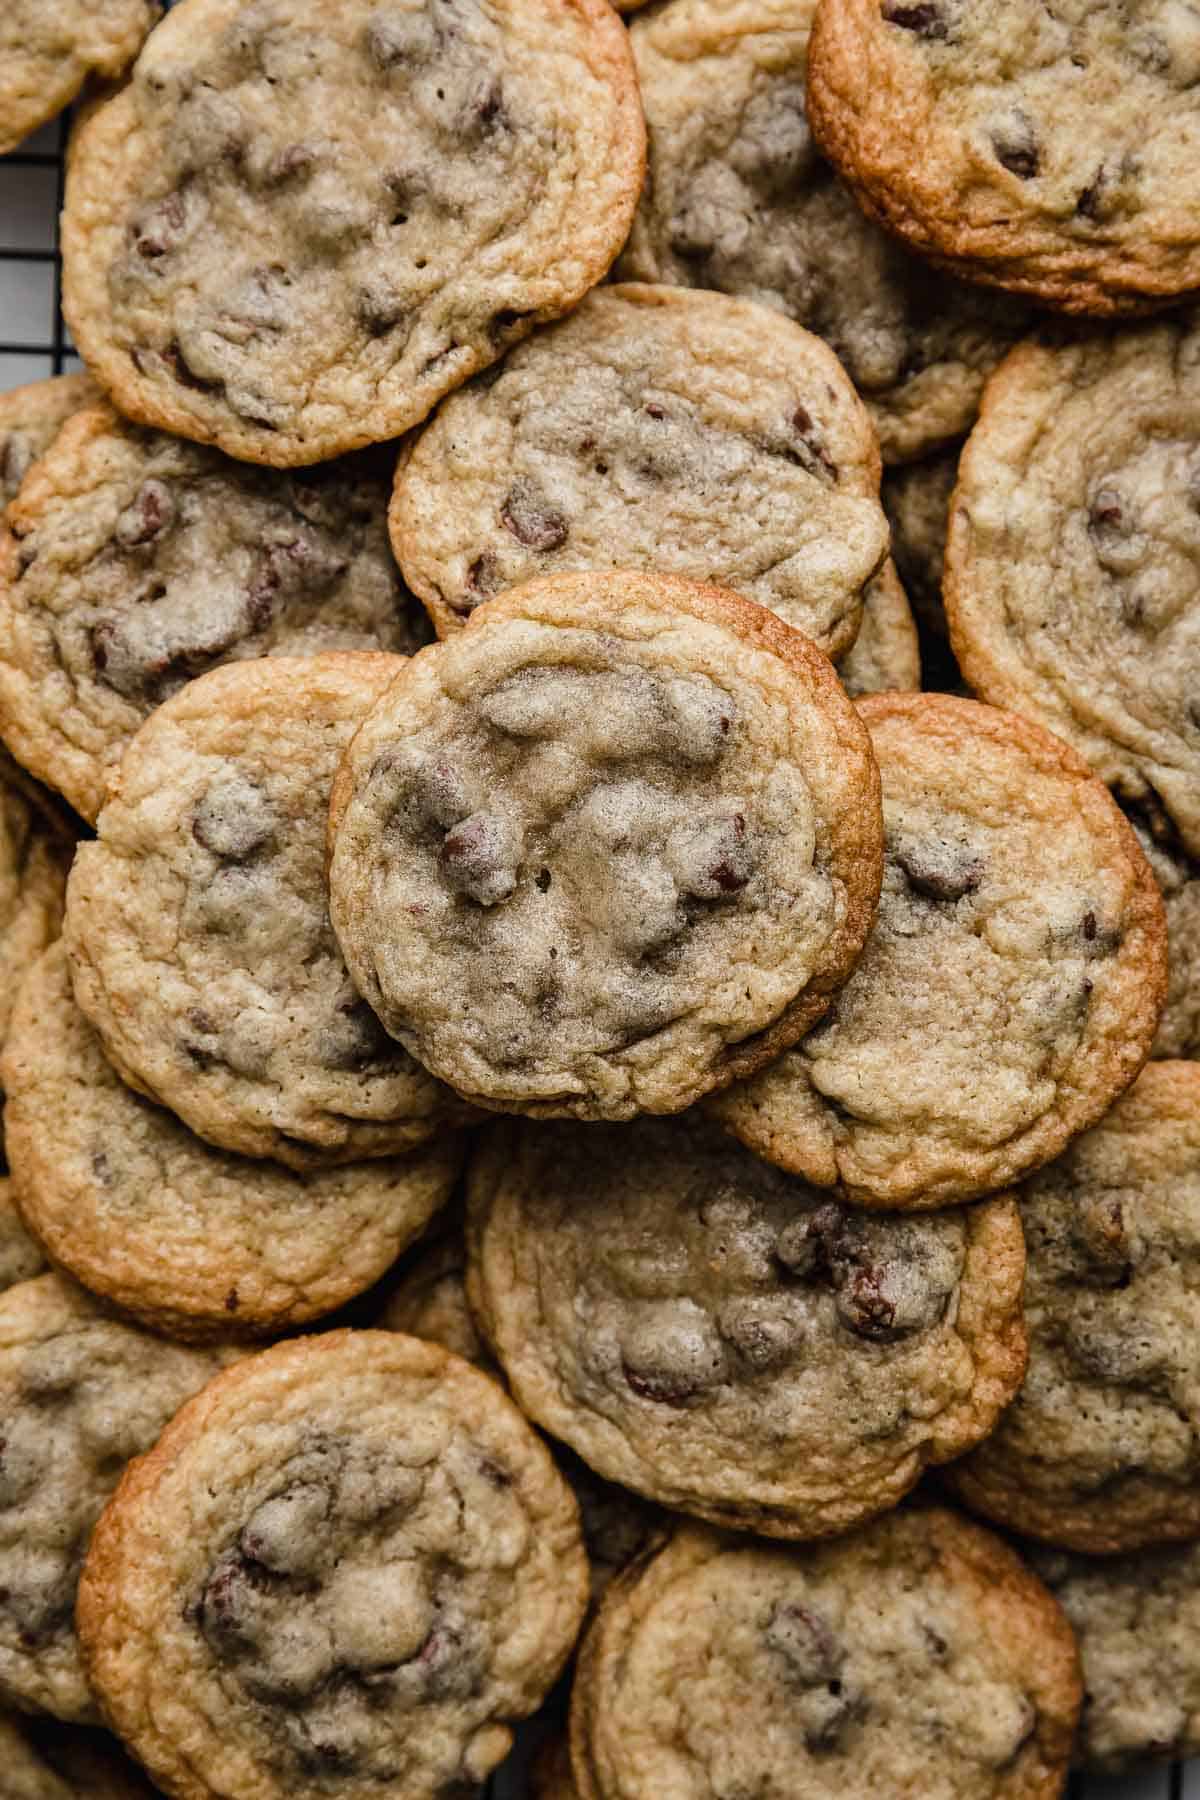 A large pile of Nestle Toll House Chocolate Chip Cookies.